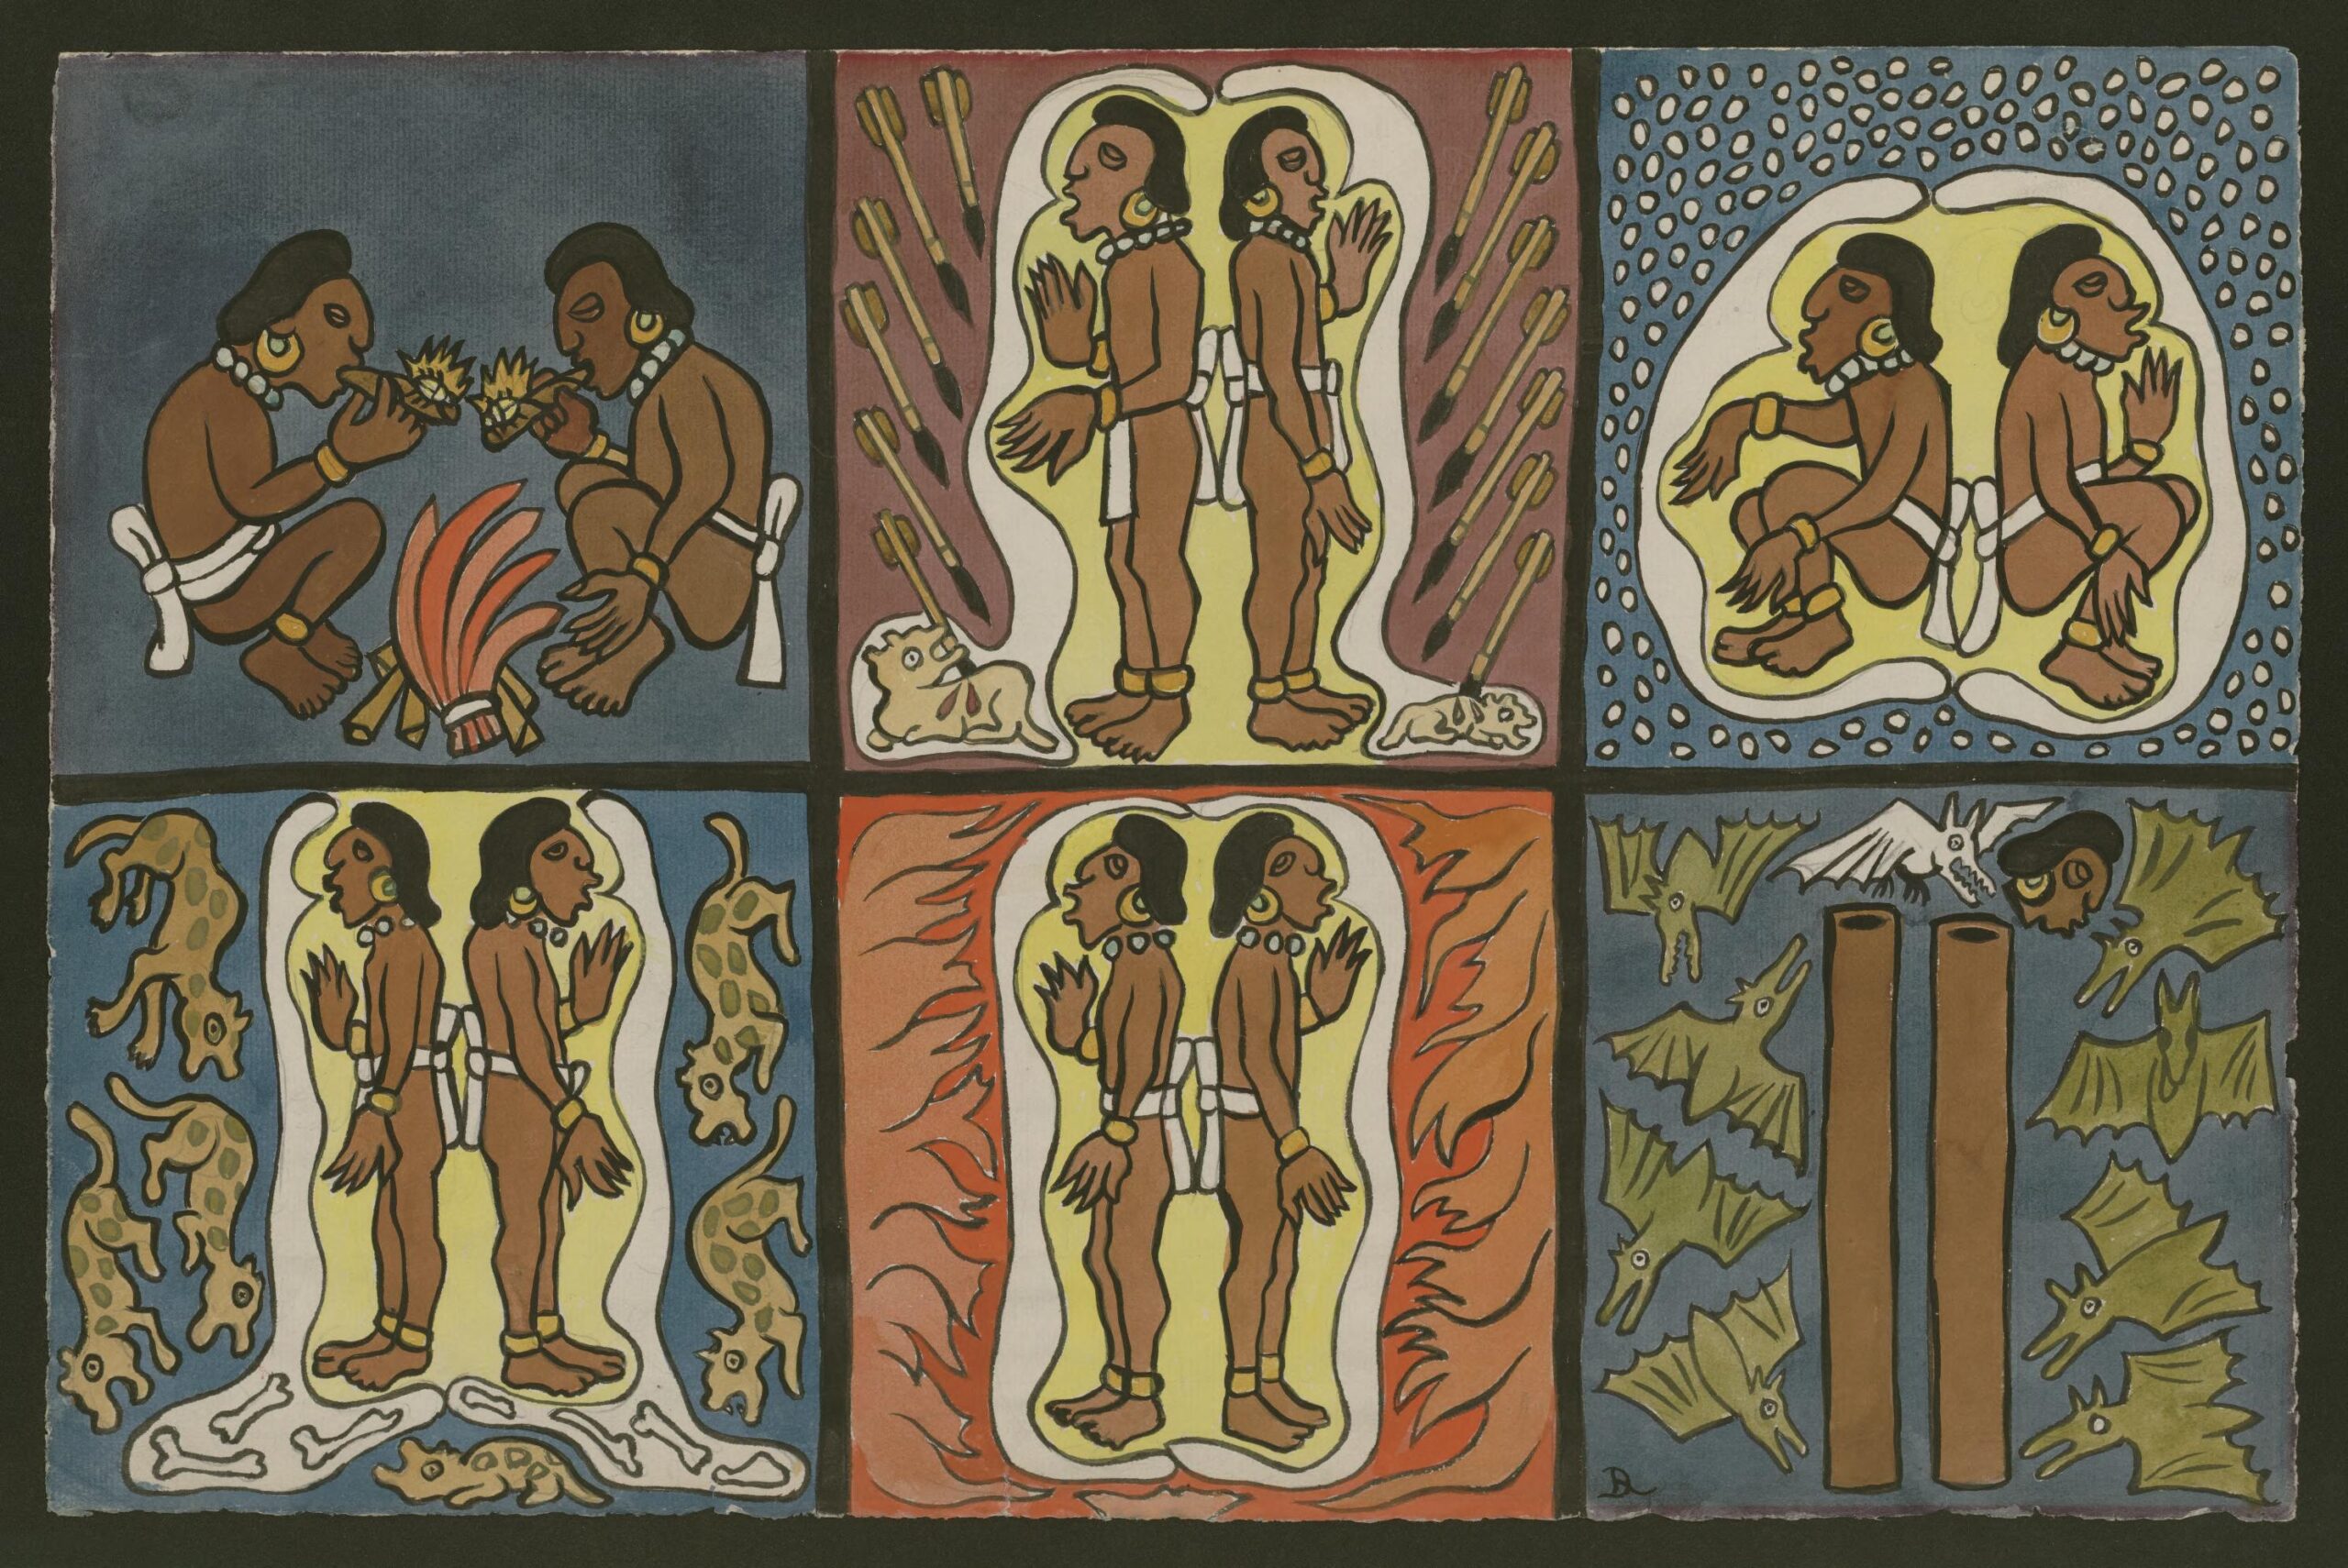 A painting of the mythical Maya hero twins by the painter Diego Rivera.